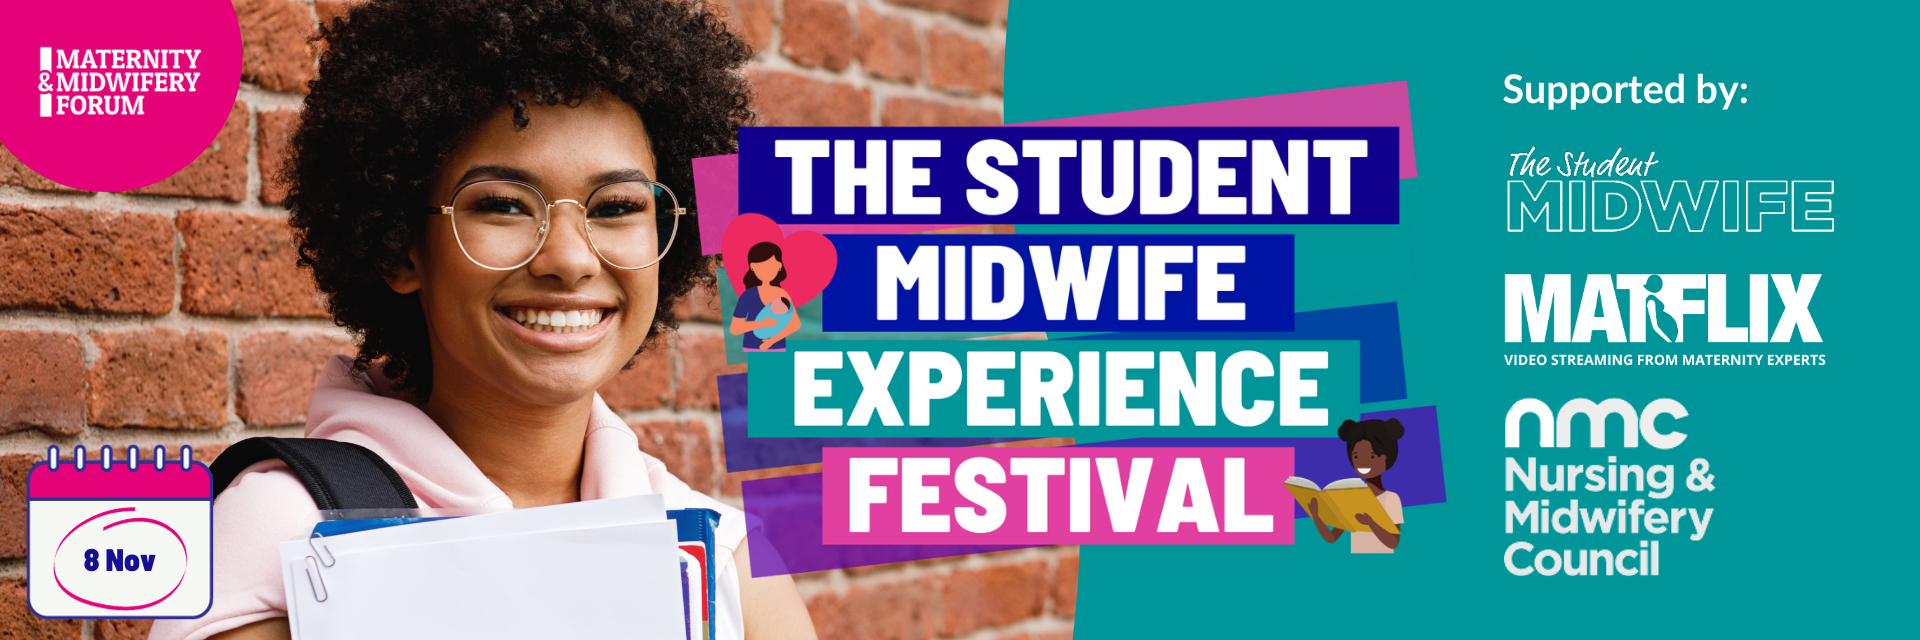 Student Midwifery Experience - Website banner